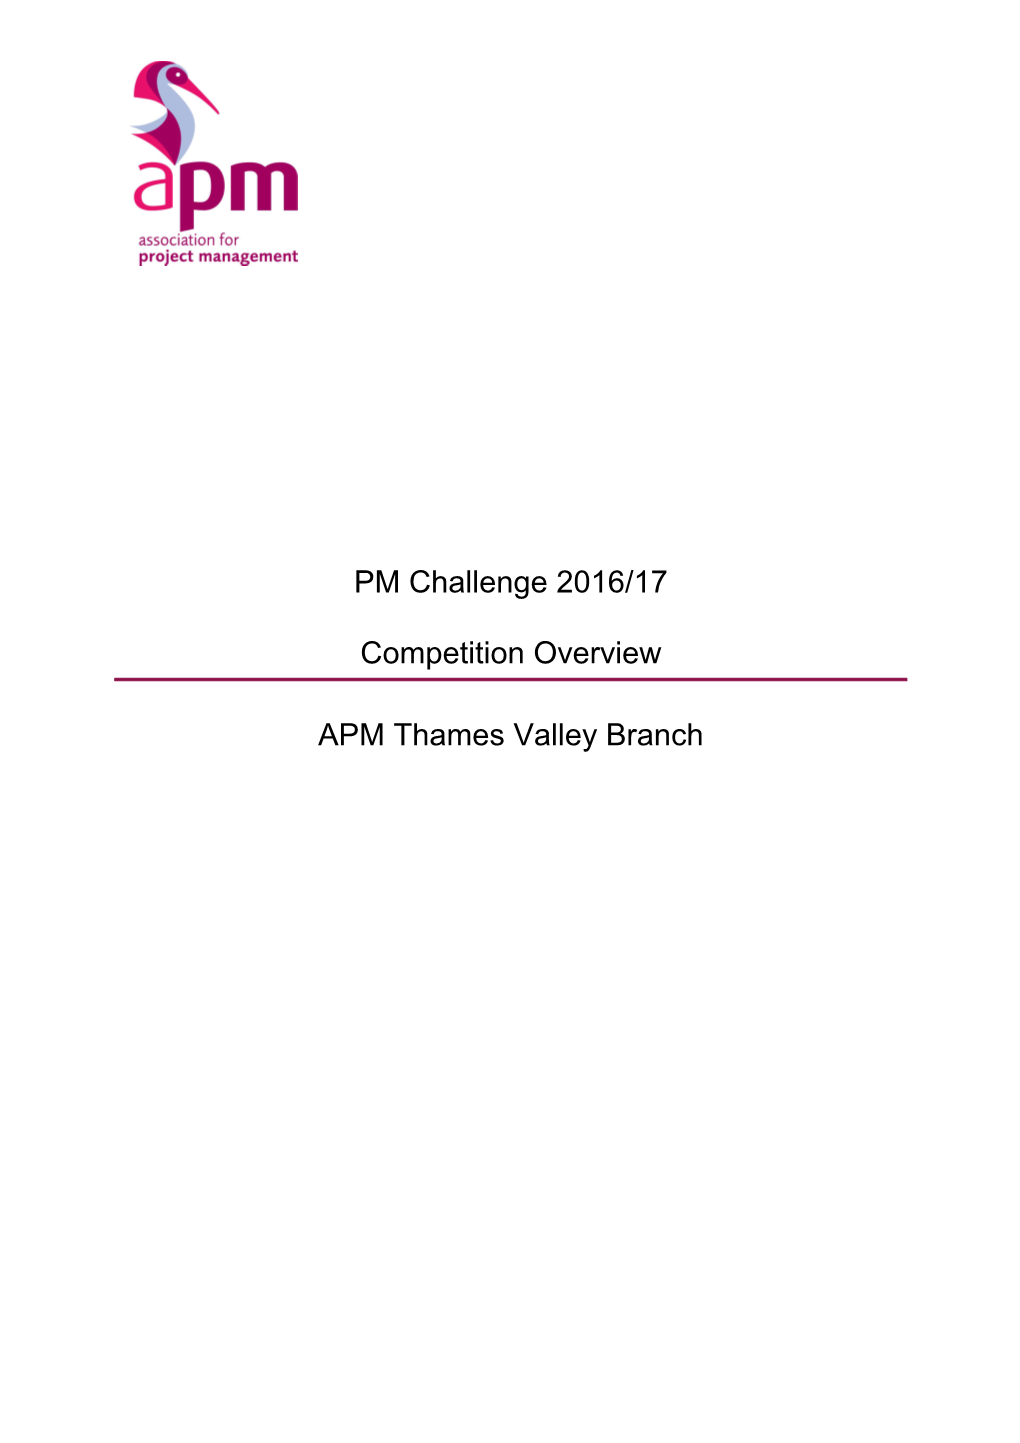 TVB PM Challenge 16-17 Information Pack and Overview.Ver2